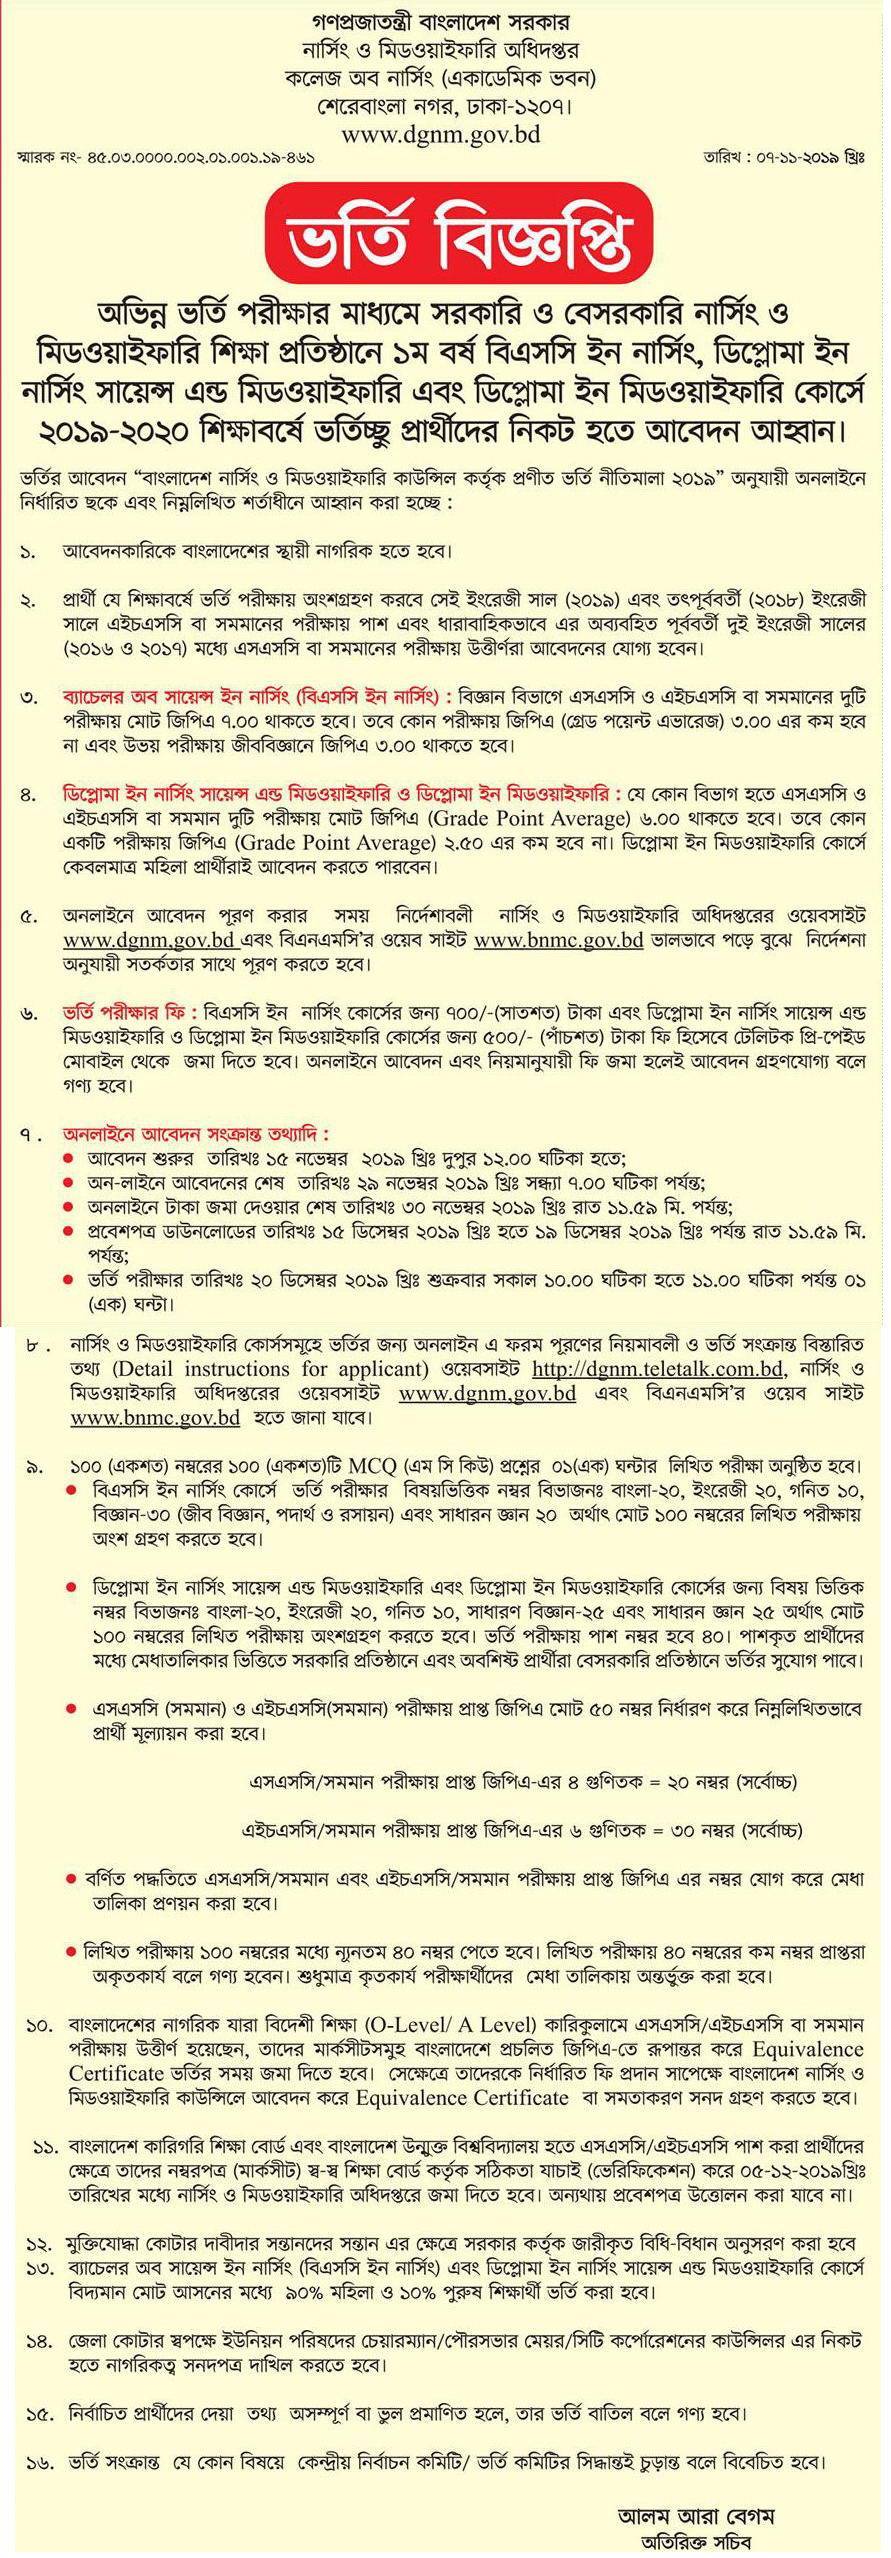 Diploma In Nursing And Midwifery Admission Circular 2020